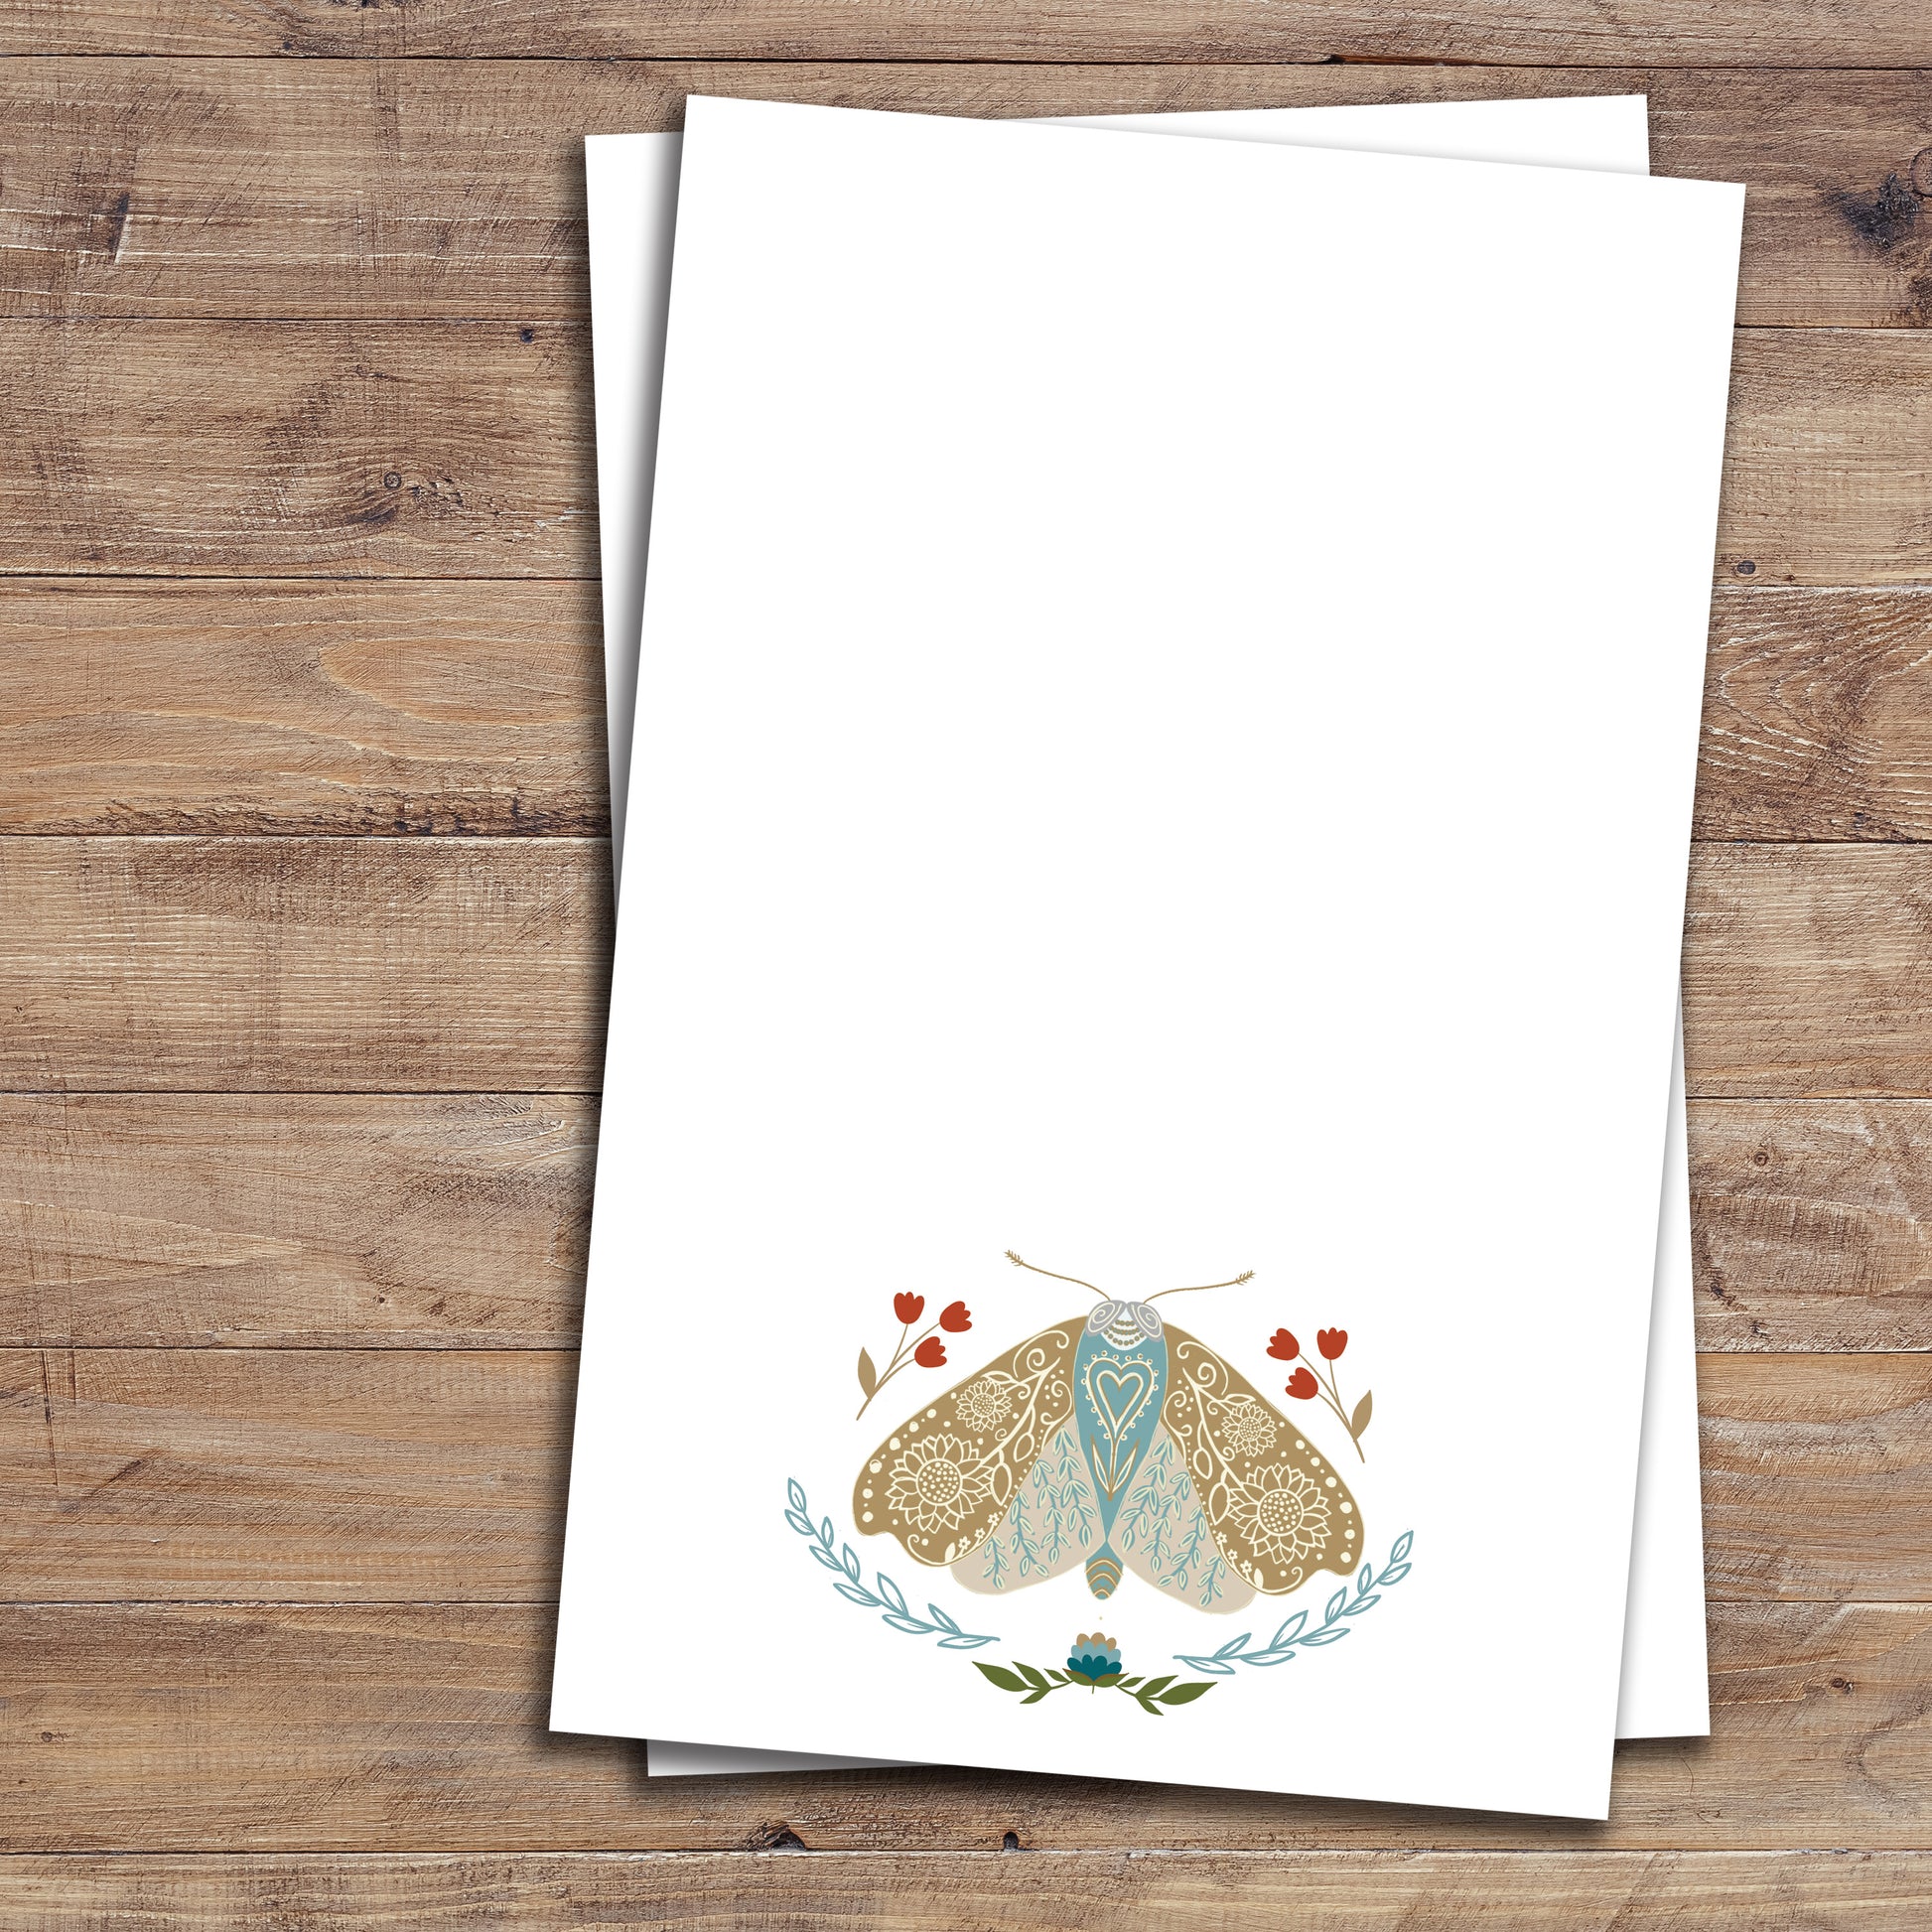 Two floral moth notepads on wood background